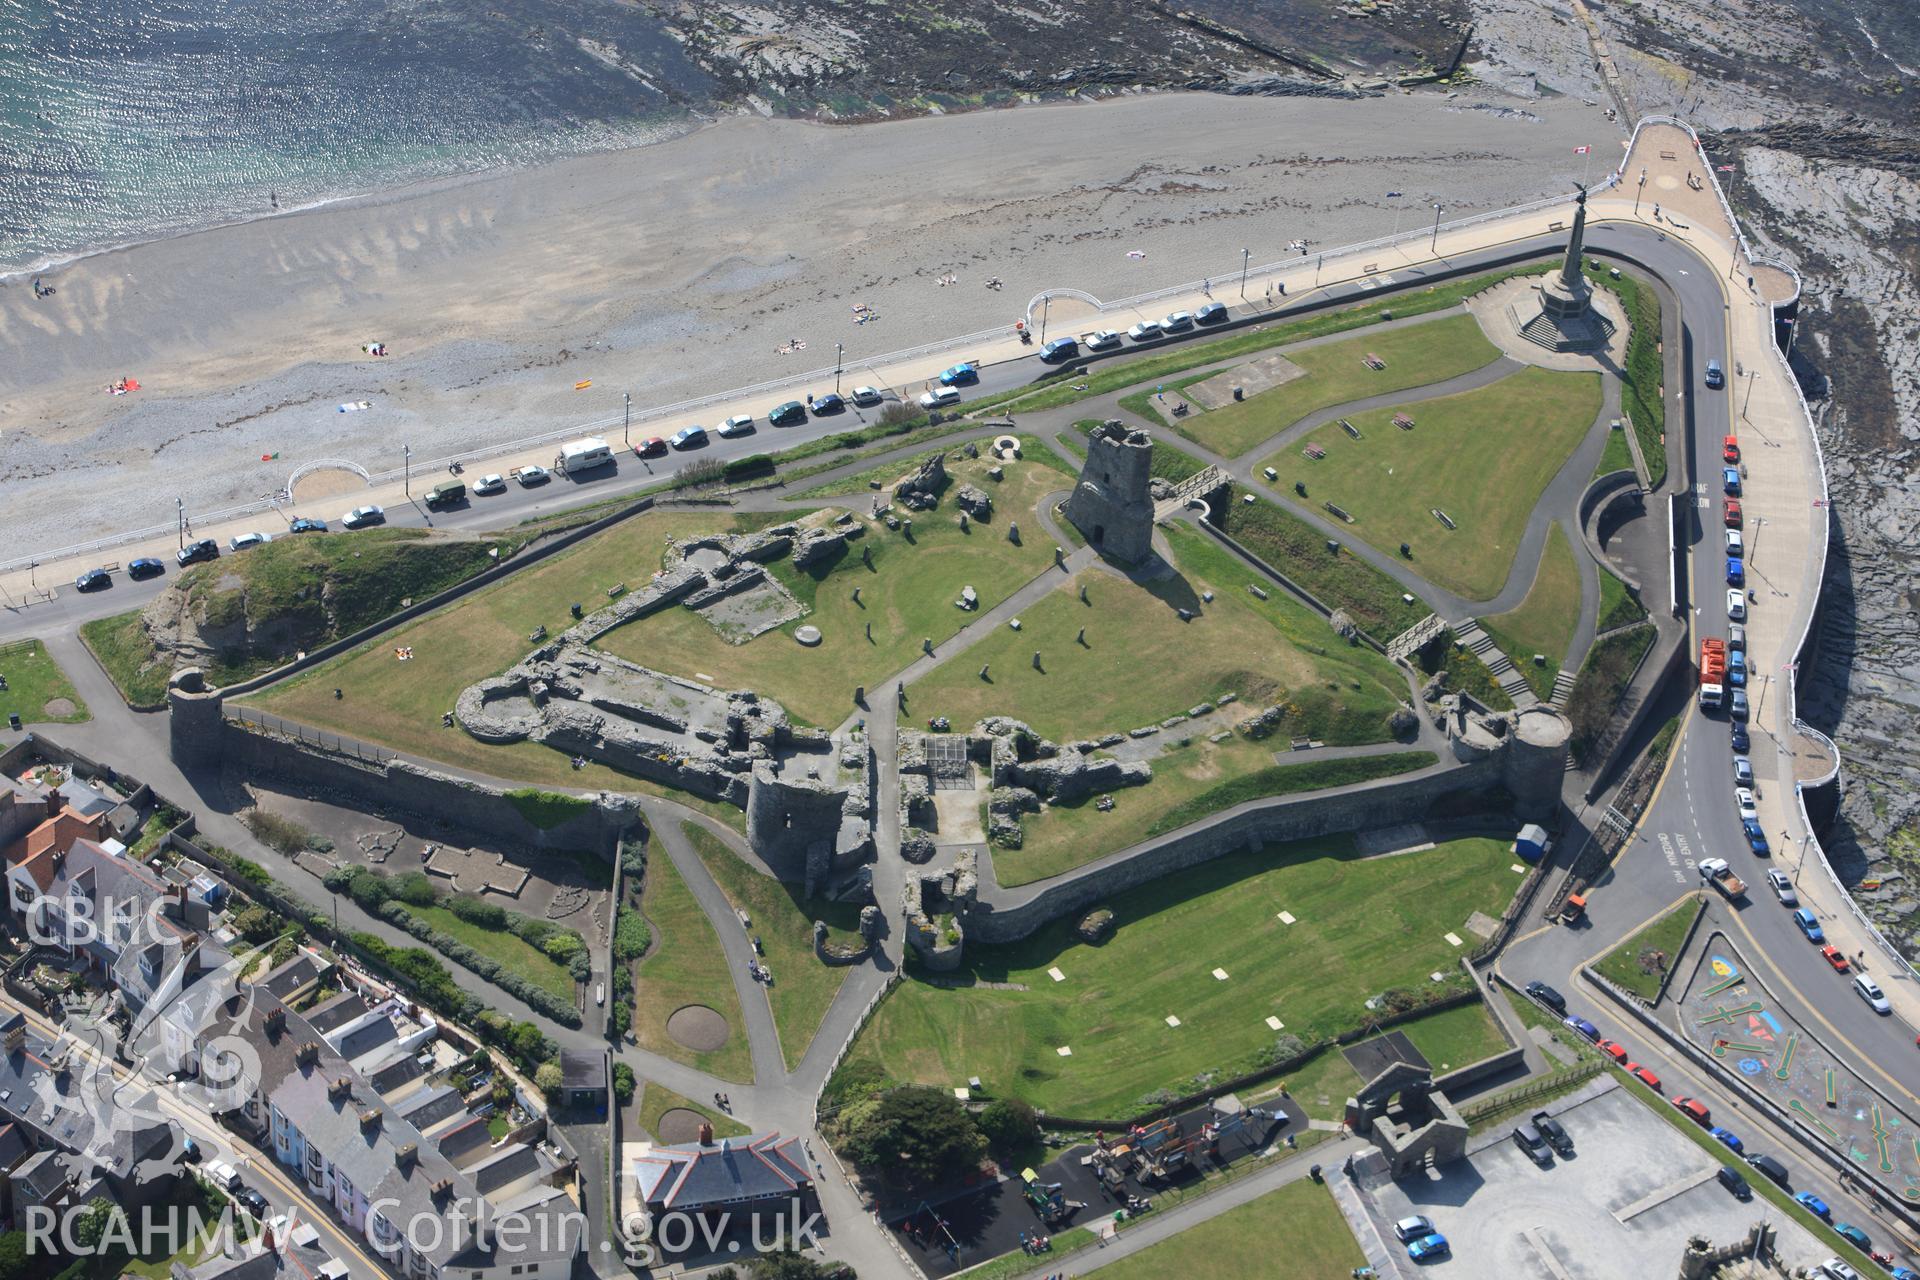 RCAHMW colour oblique photograph of Aberystwyth Castle. Taken by Toby Driver on 25/05/2010.